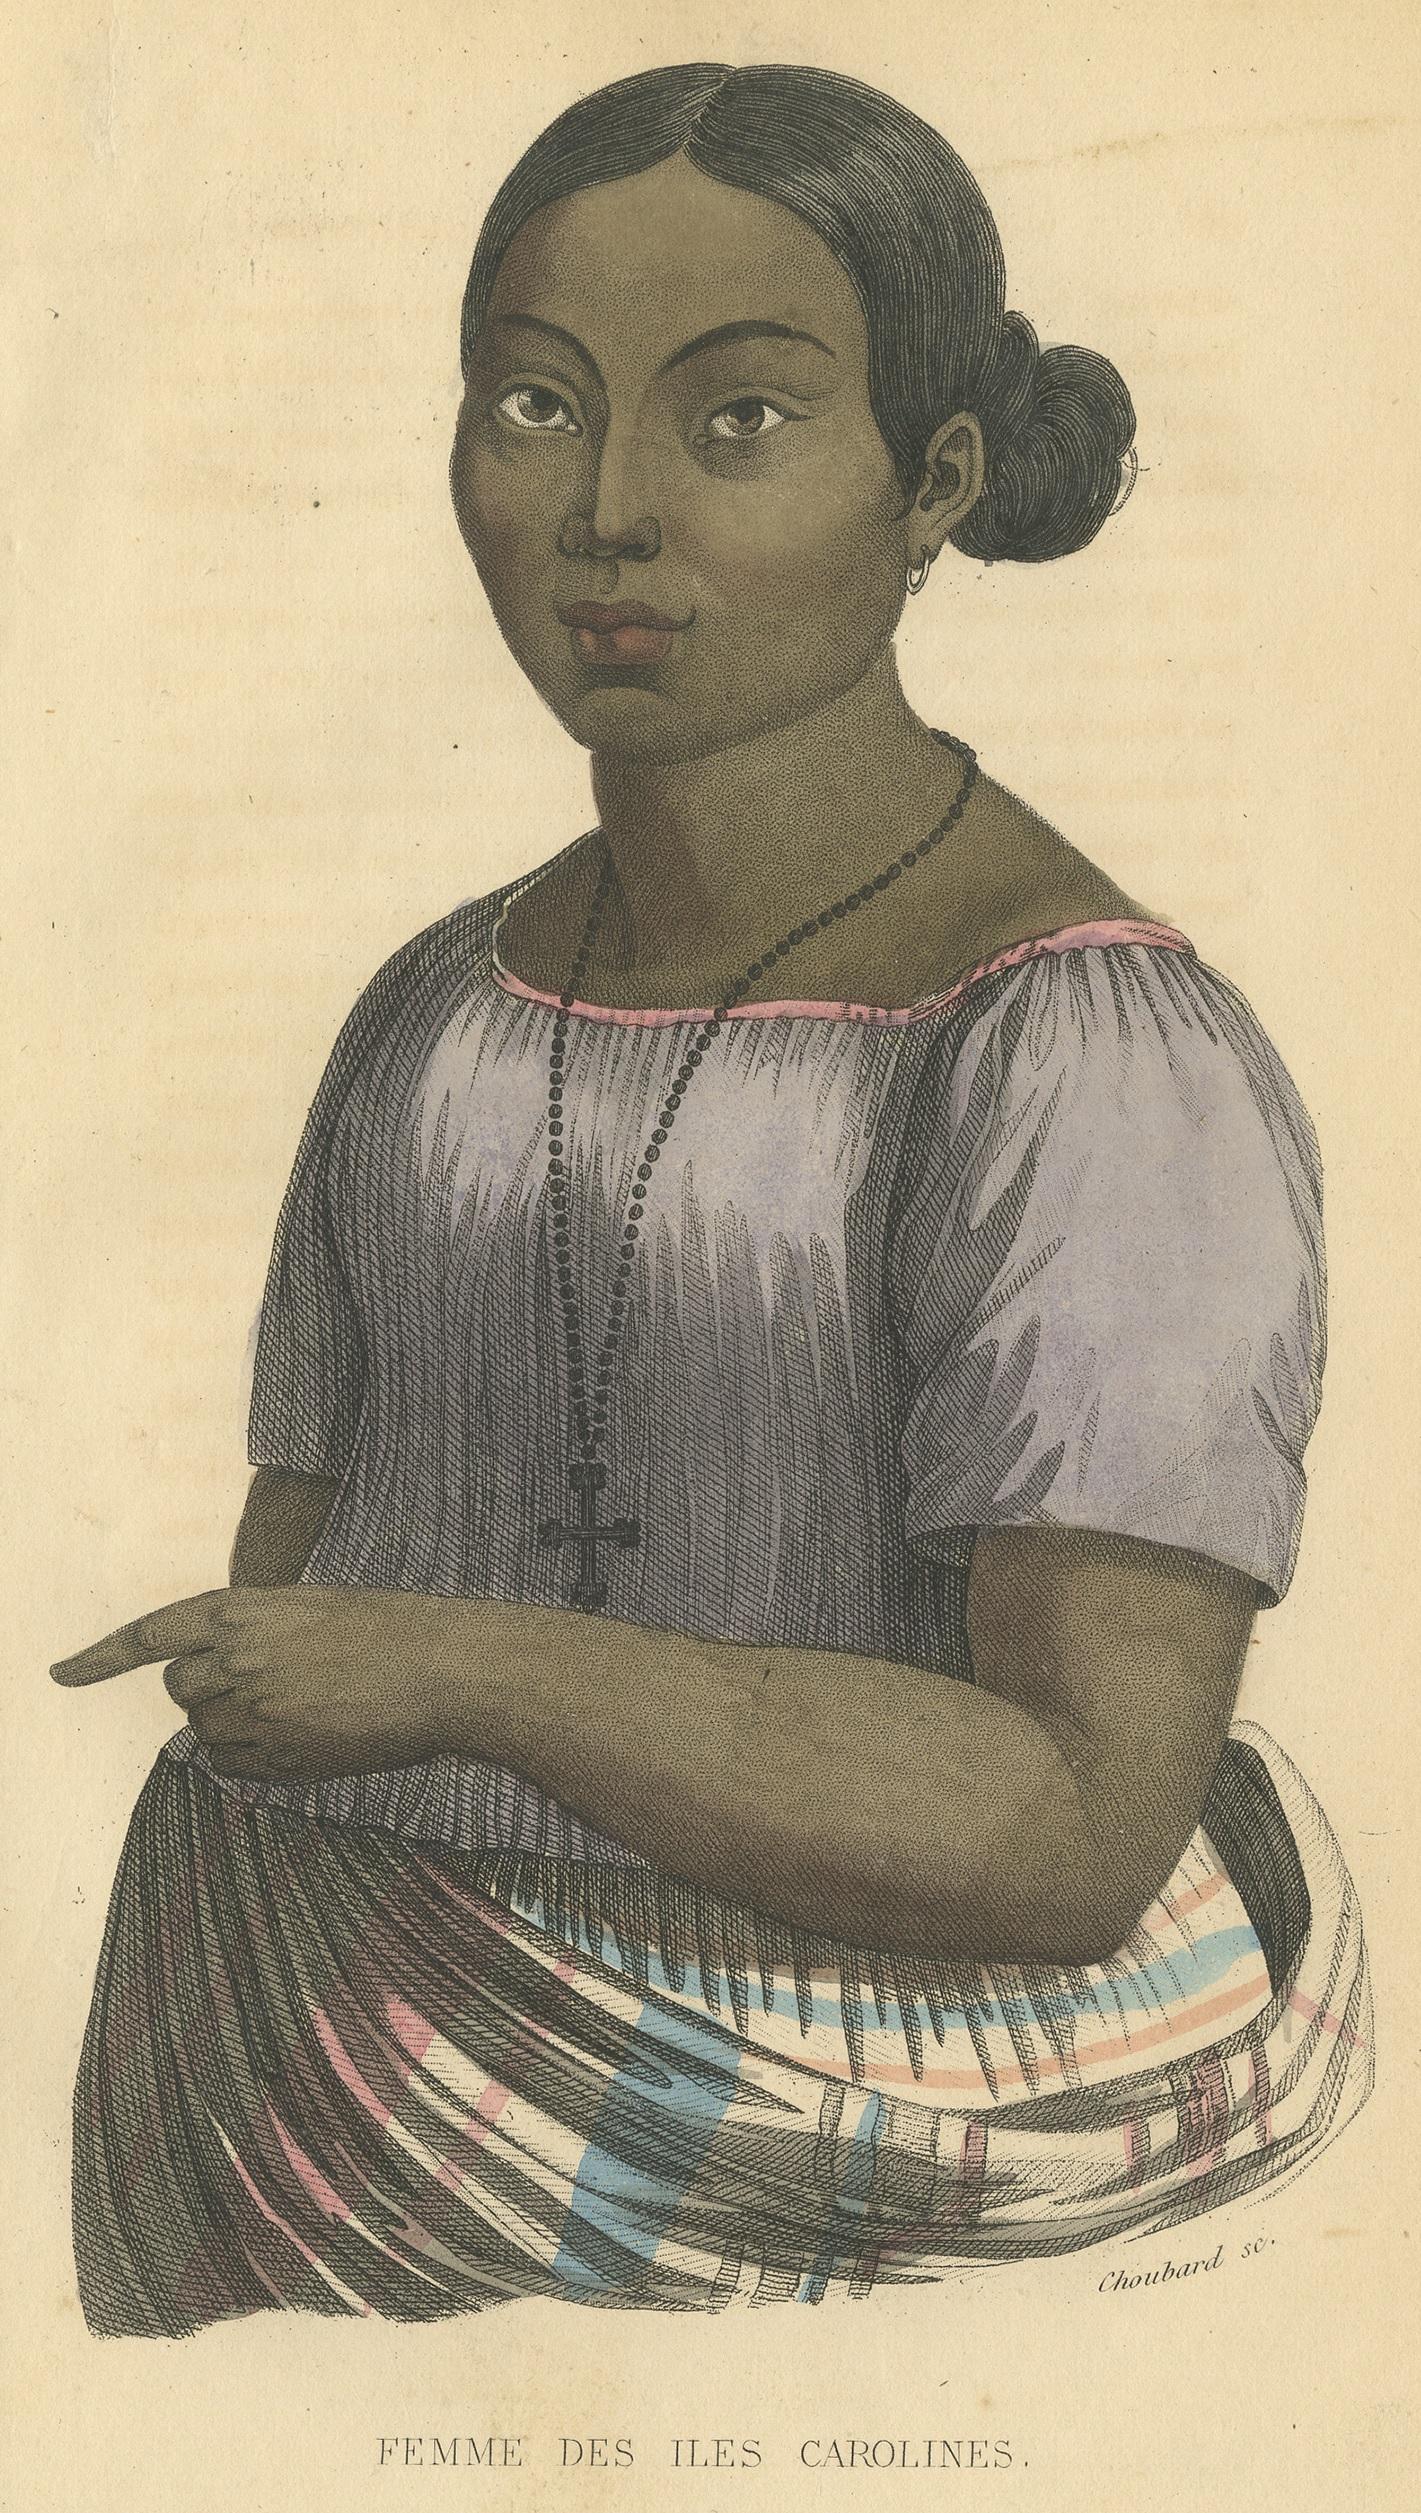 Antique print titled 'Femme des Iles Carolines'. Lithograph of a female of the Caroline Islands, a widely scattered archipelago of tiny islands in the western Pacific Ocean, to the north of New Guinea. This print originates from 'Histoire Naturelle